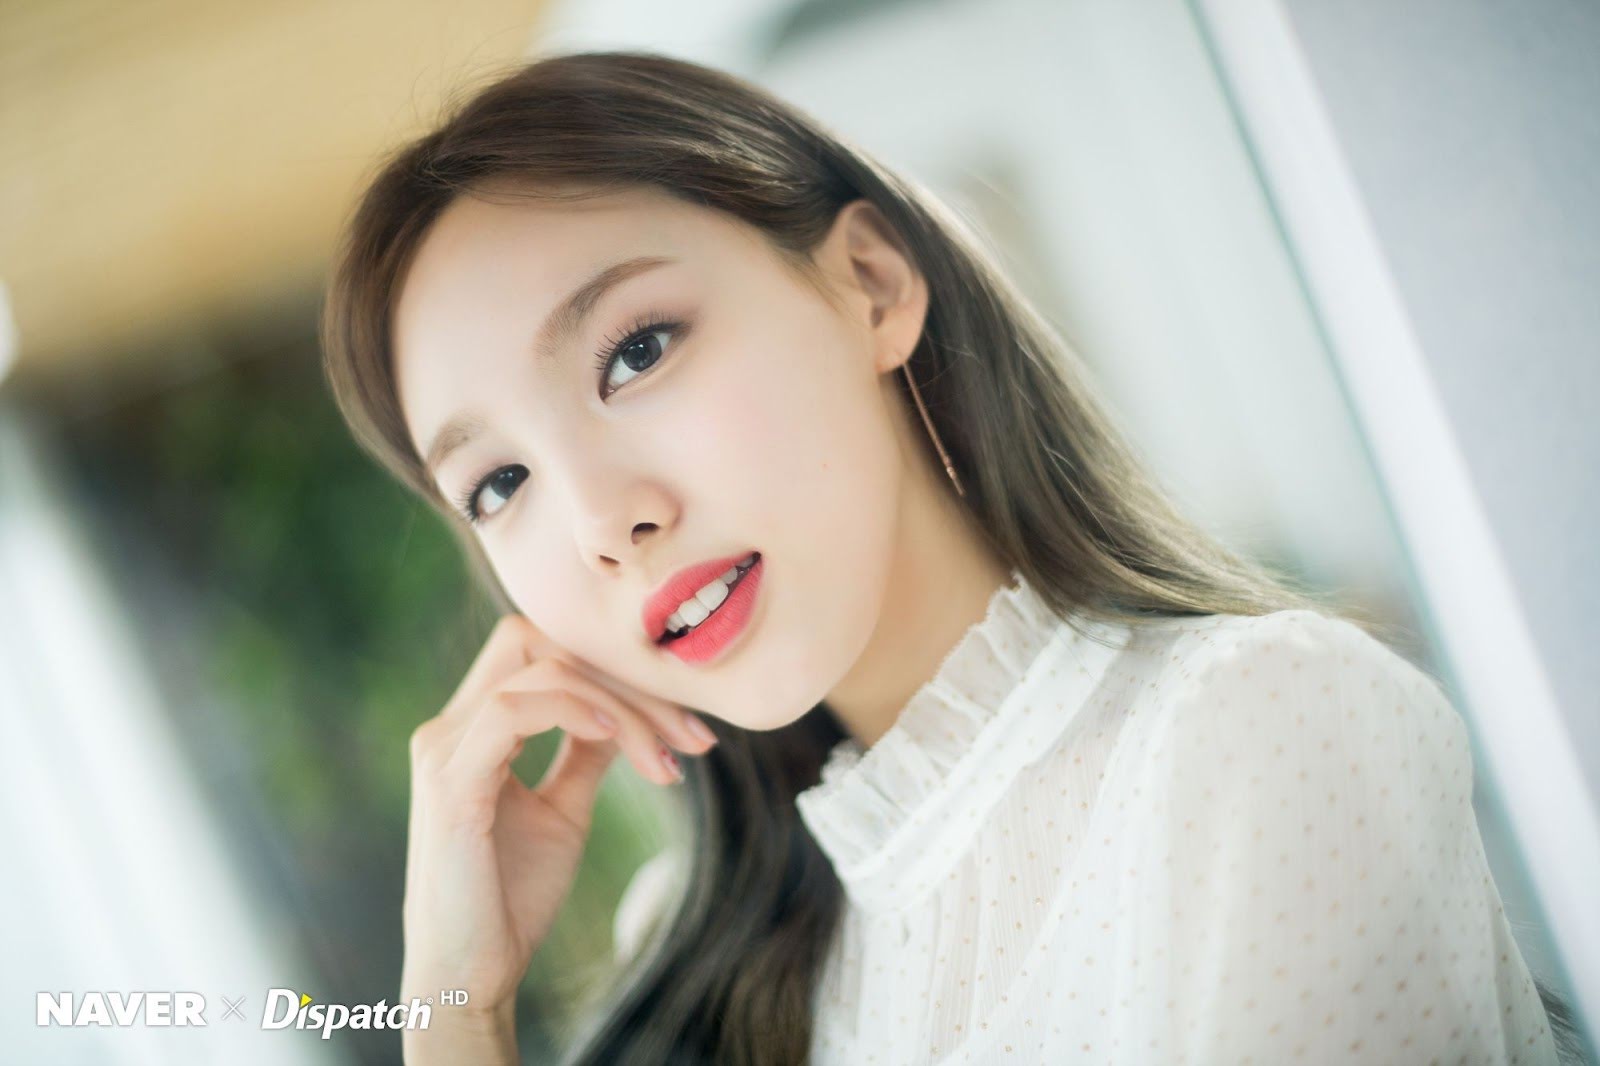 Nayeon-Feel-Special-promotion-photoshoot-by-Naver-x-Dispatch-twice-jyp-ent-43020176-2000-1333